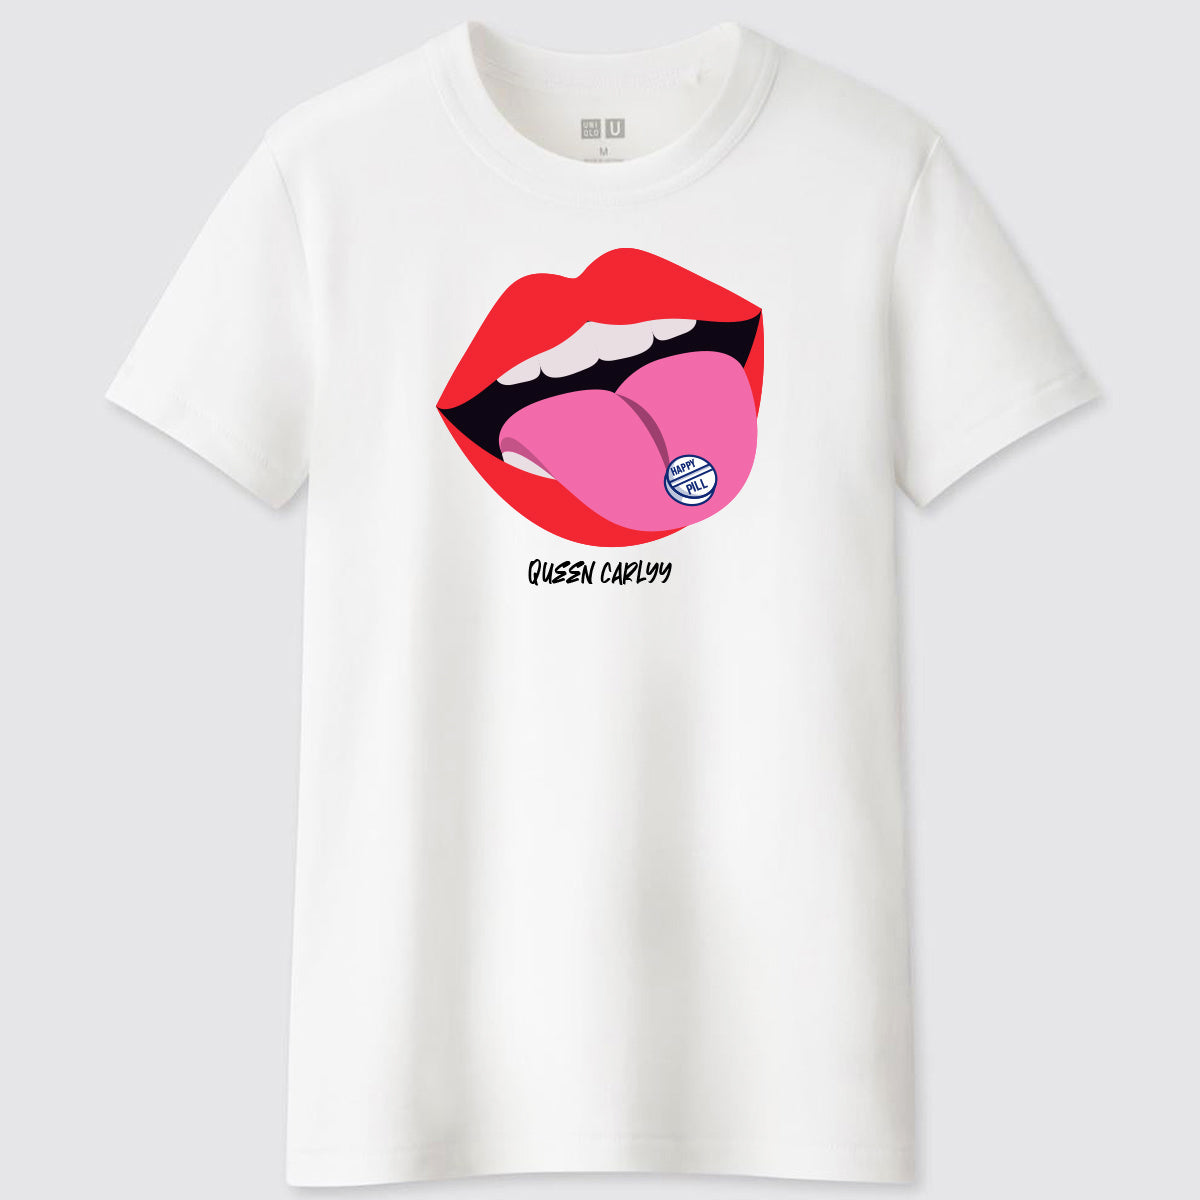 Happy Pill T-Shirt by Carly Lind